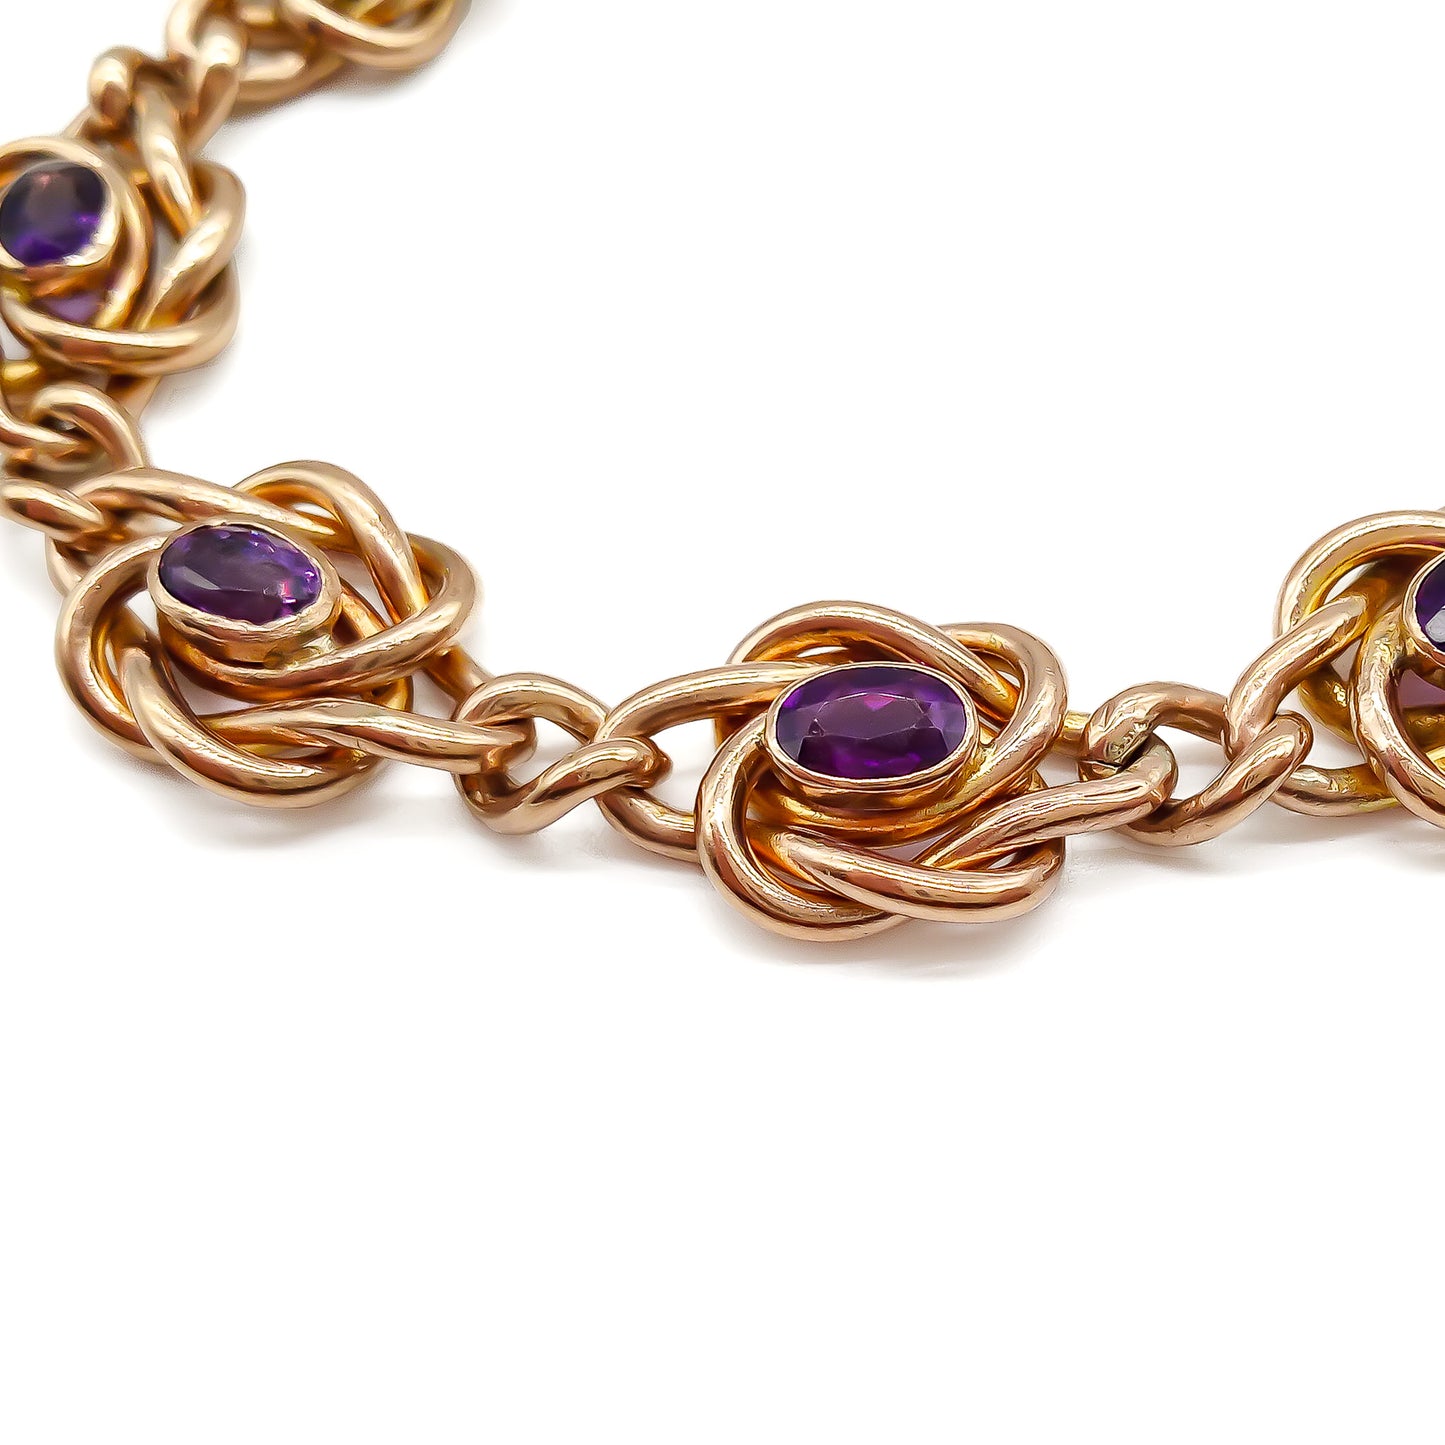 Stunning Edwardian rose gold bracelet set with eight faceted dark purple amethysts, with a padlock and safety chain. Birmingham 1908